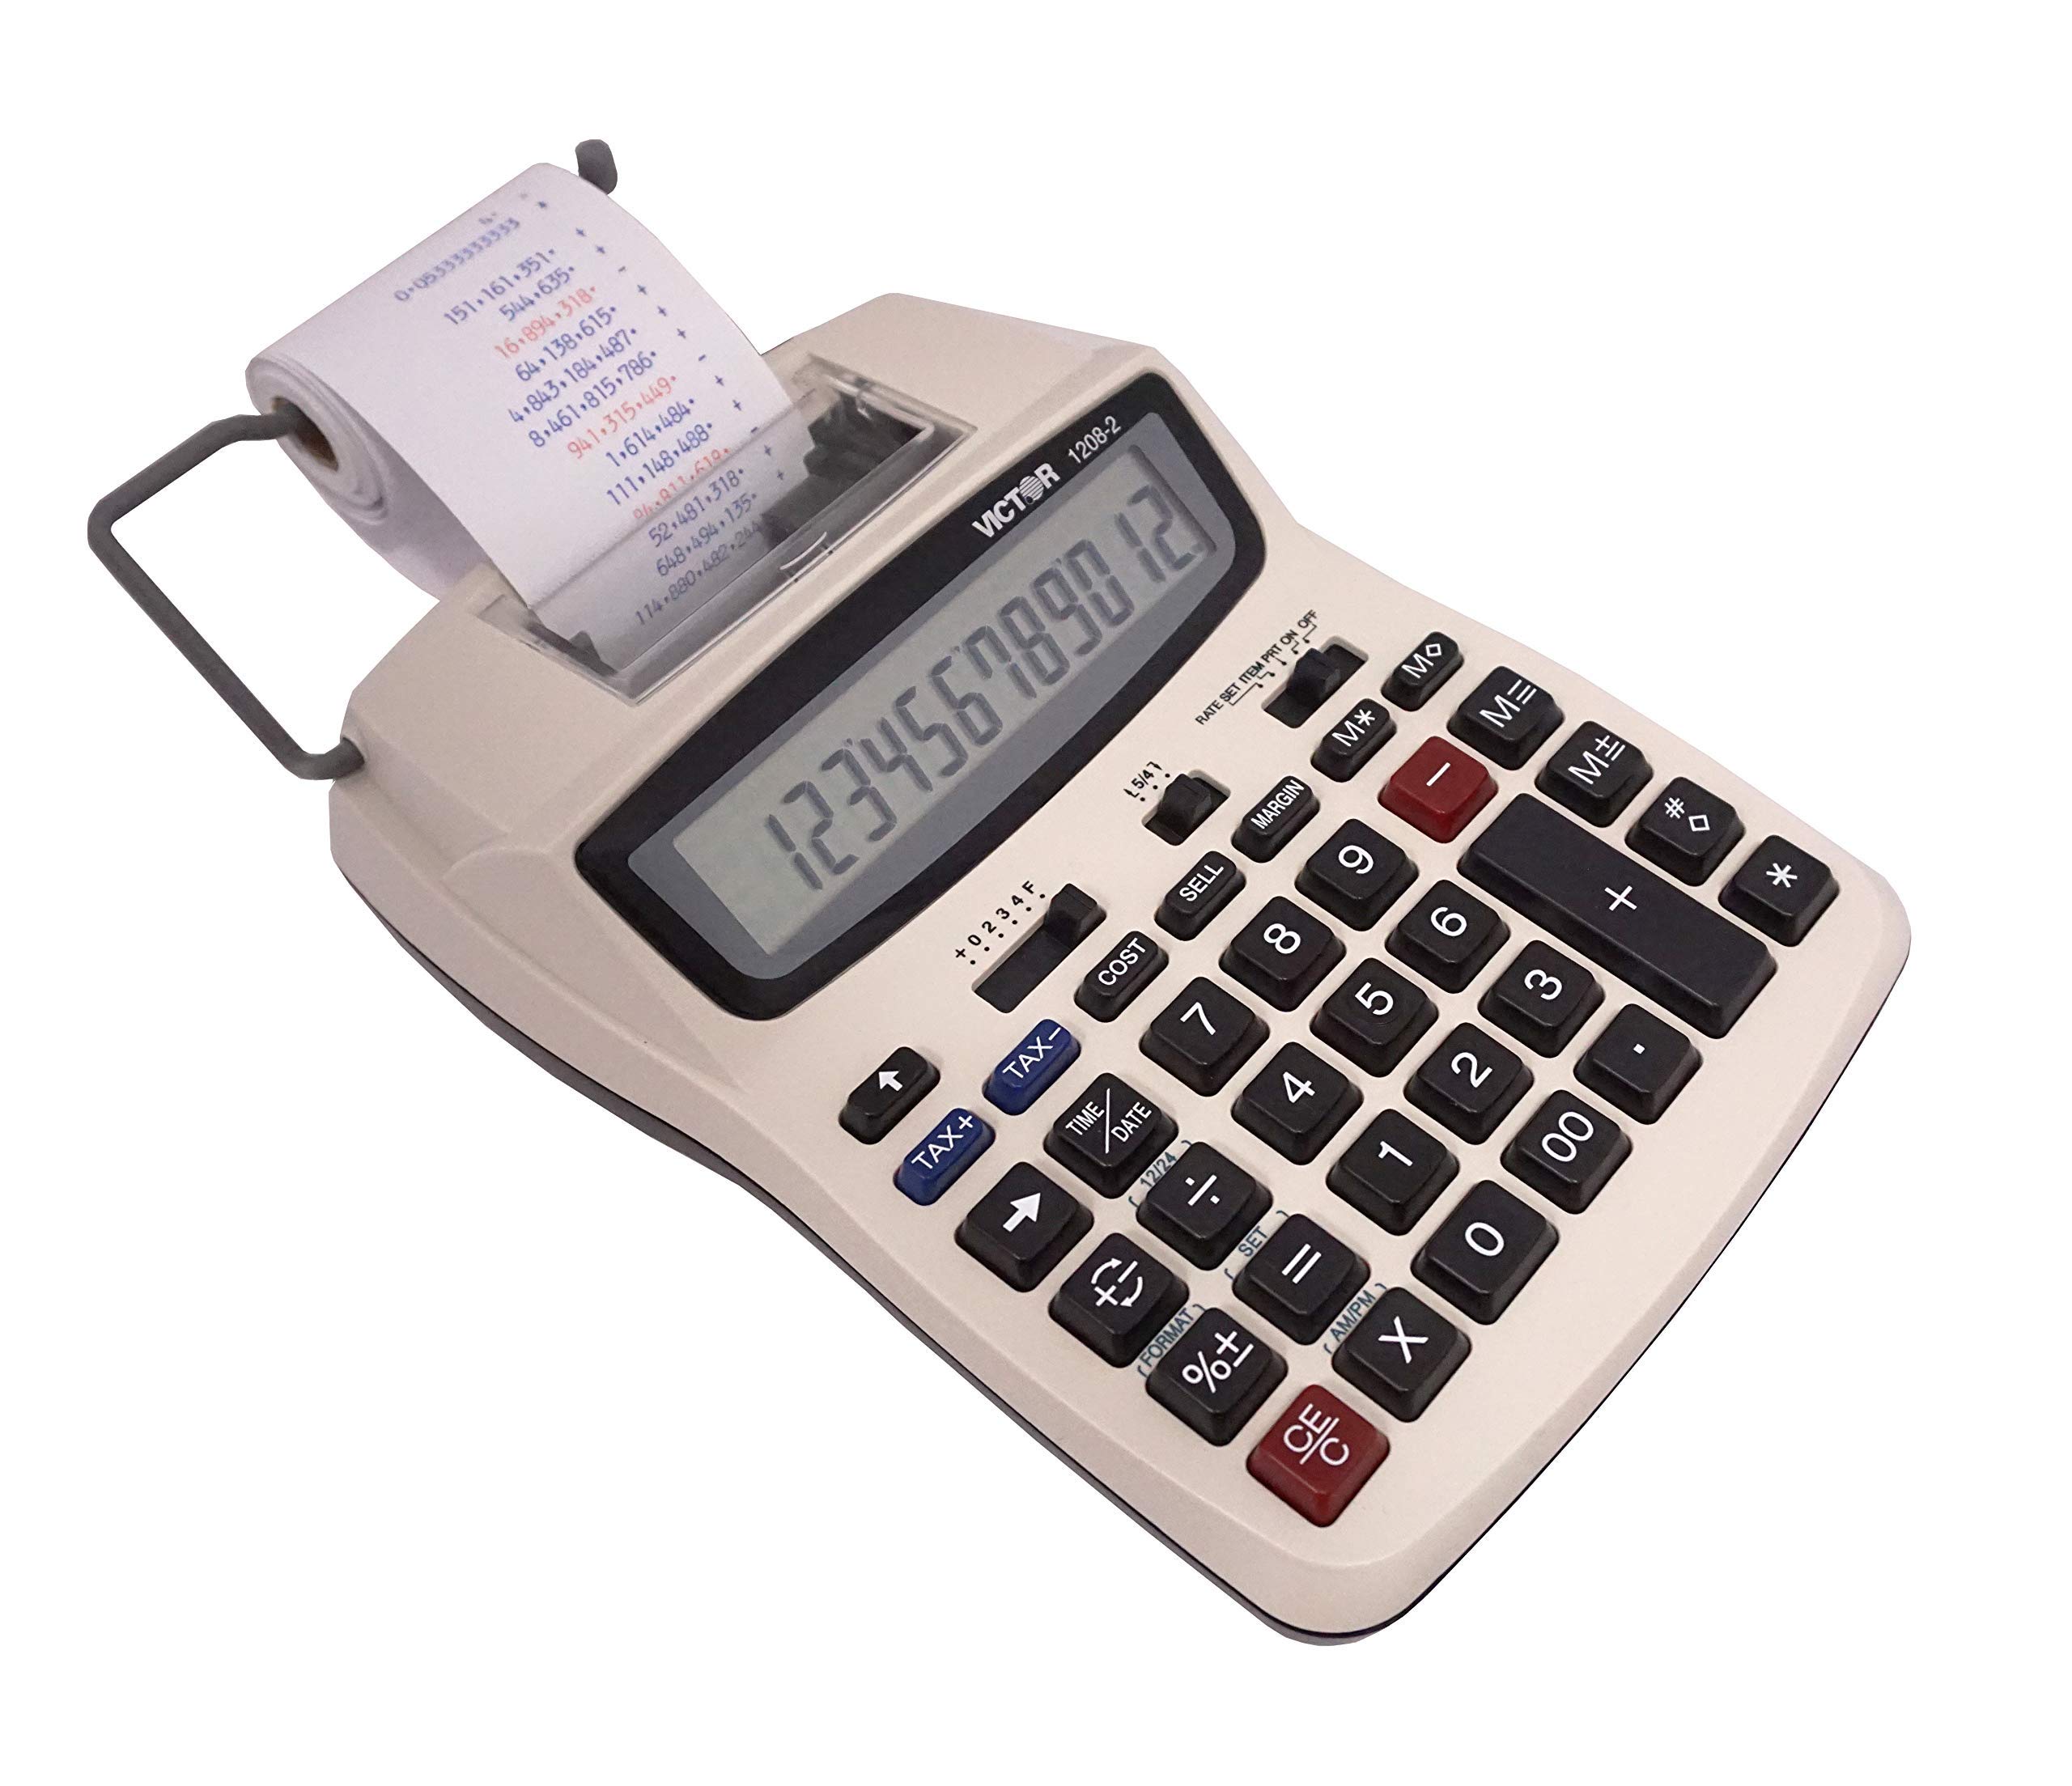 Victor Printing Calculator, 1208-2 Compact and Reliable Adding Machine with 12 Digit LCD Display, Battery or AC Powered, Includes Adapter,White